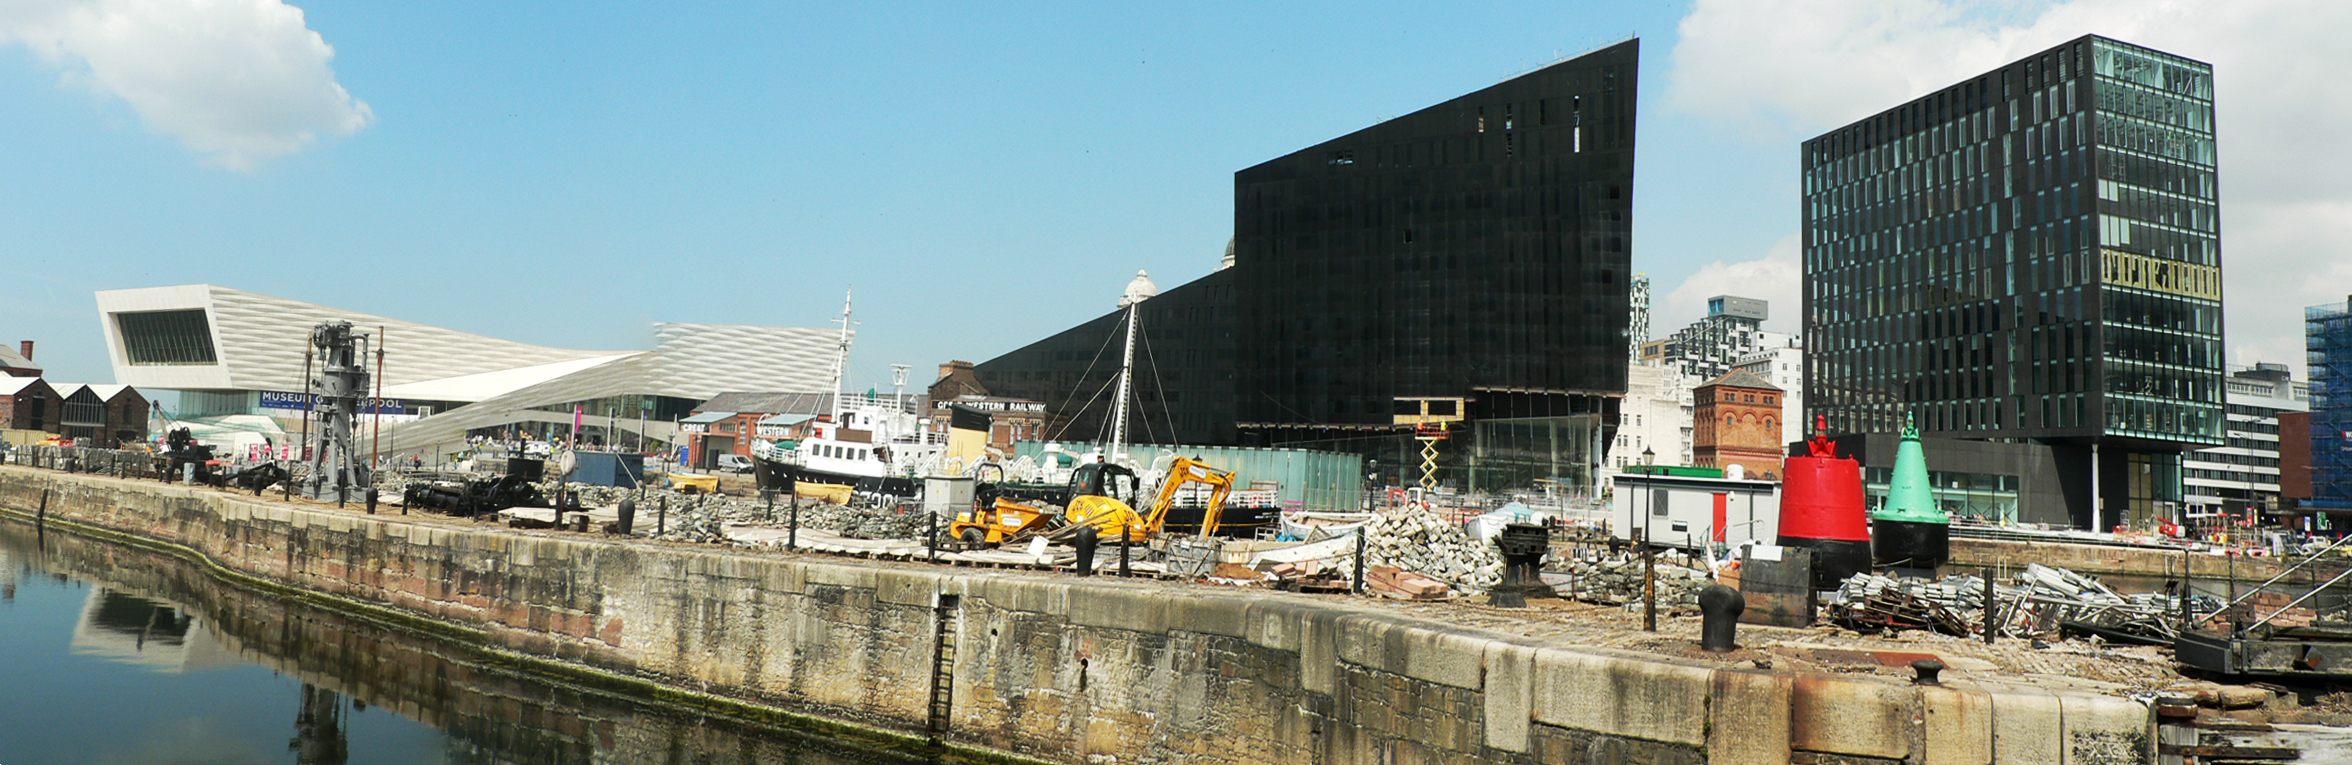 Figure 11: Waterfront, Liverpool. Photo by author.